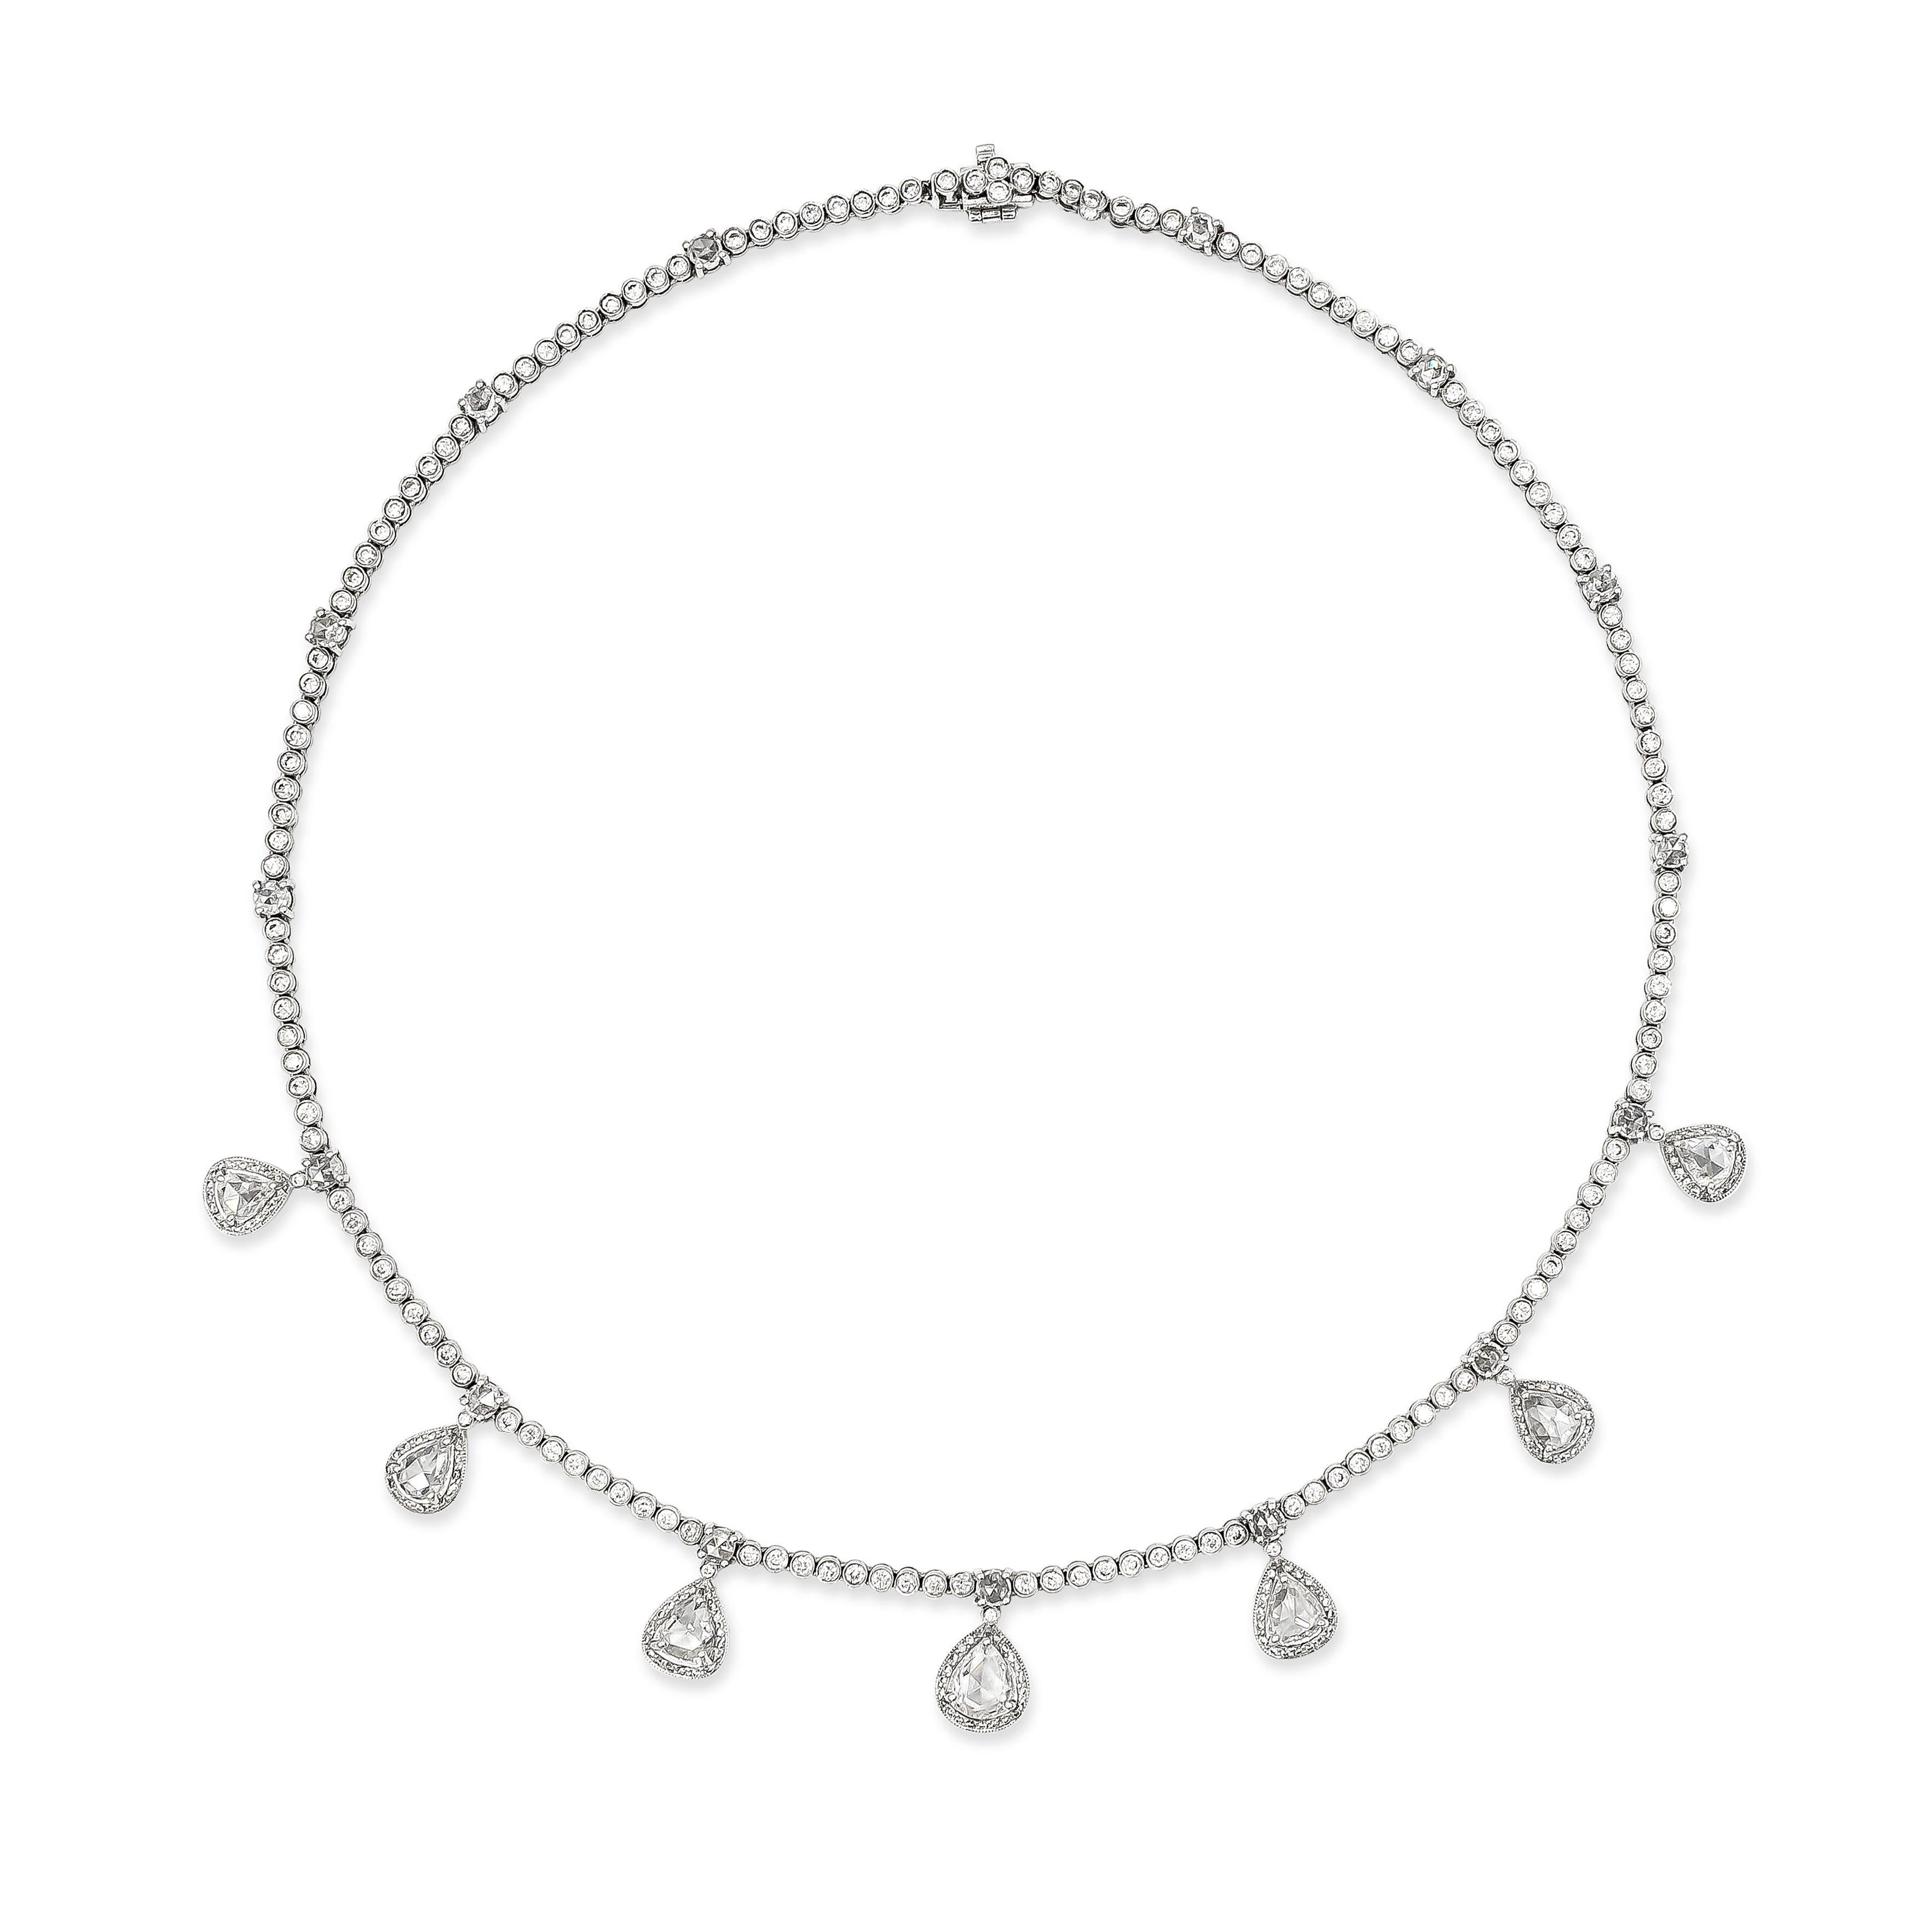 A unique and chic necklace style showcasing a row of round brilliant diamonds bezel set in 18k white gold. Accented with rose cut diamonds in pear shape and rounds, spaced evenly throughout the front of the necklace. Rose cut diamonds weigh 3.95